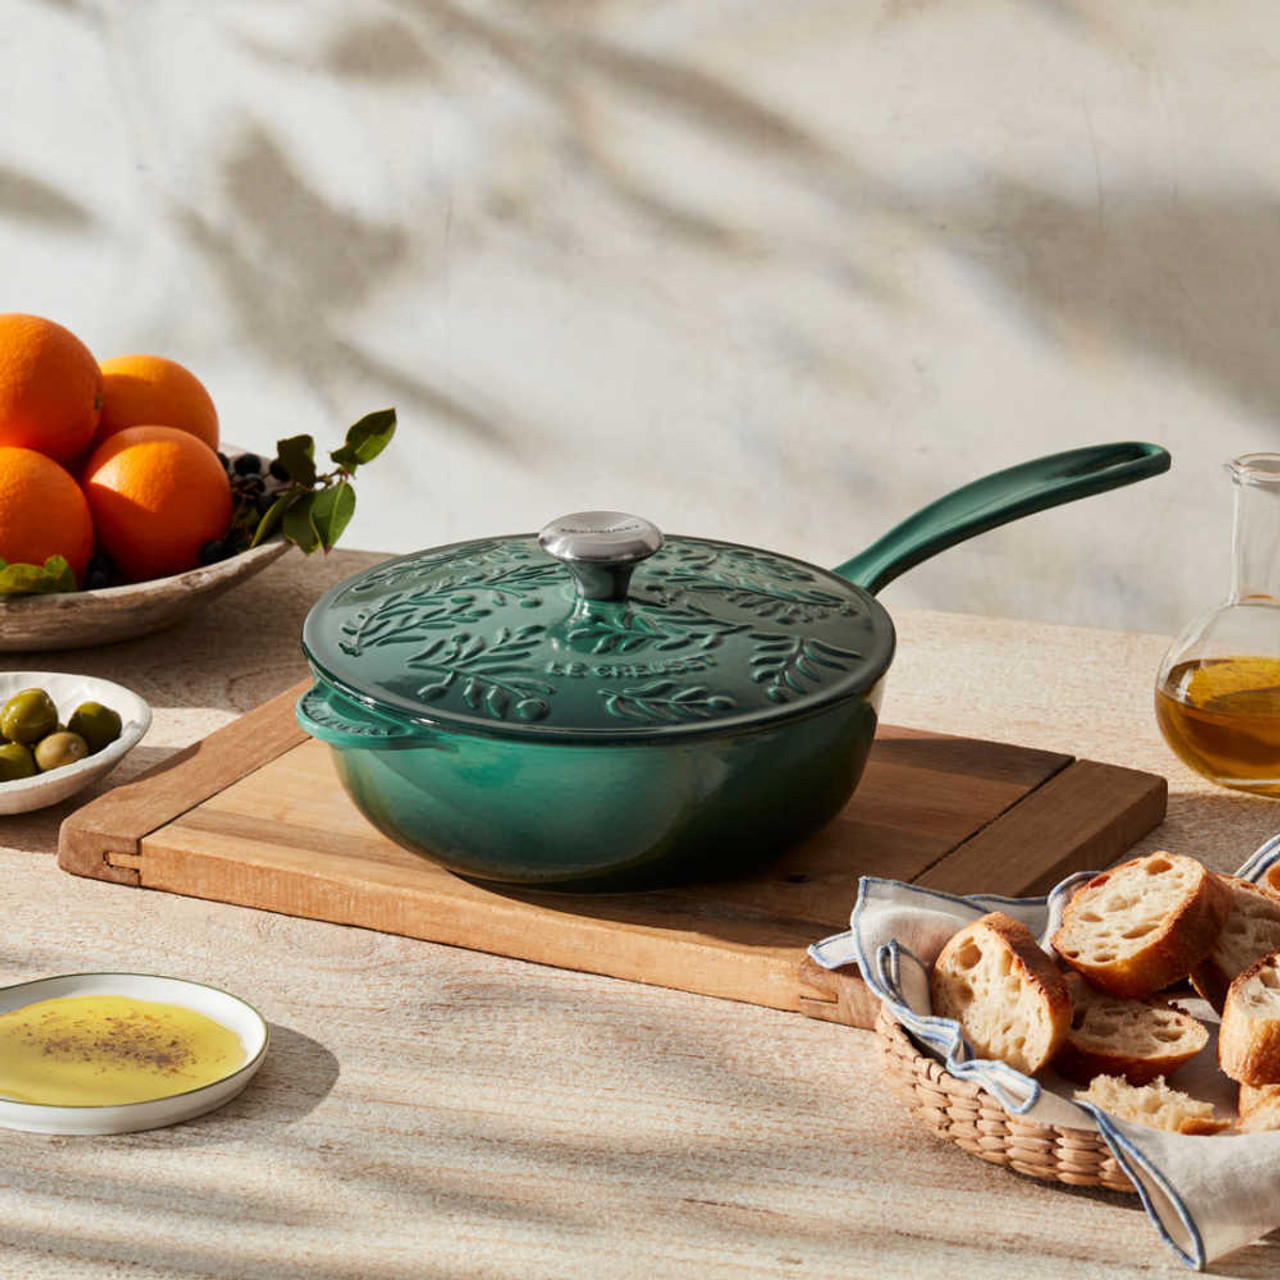 https://cdn11.bigcommerce.com/s-hccytny0od/images/stencil/1280x1280/products/5502/24029/Le_Creuset_Olive_Branch_Collection_Saucier_in_Artichaut__44705.1688652153.jpg?c=2?imbypass=on